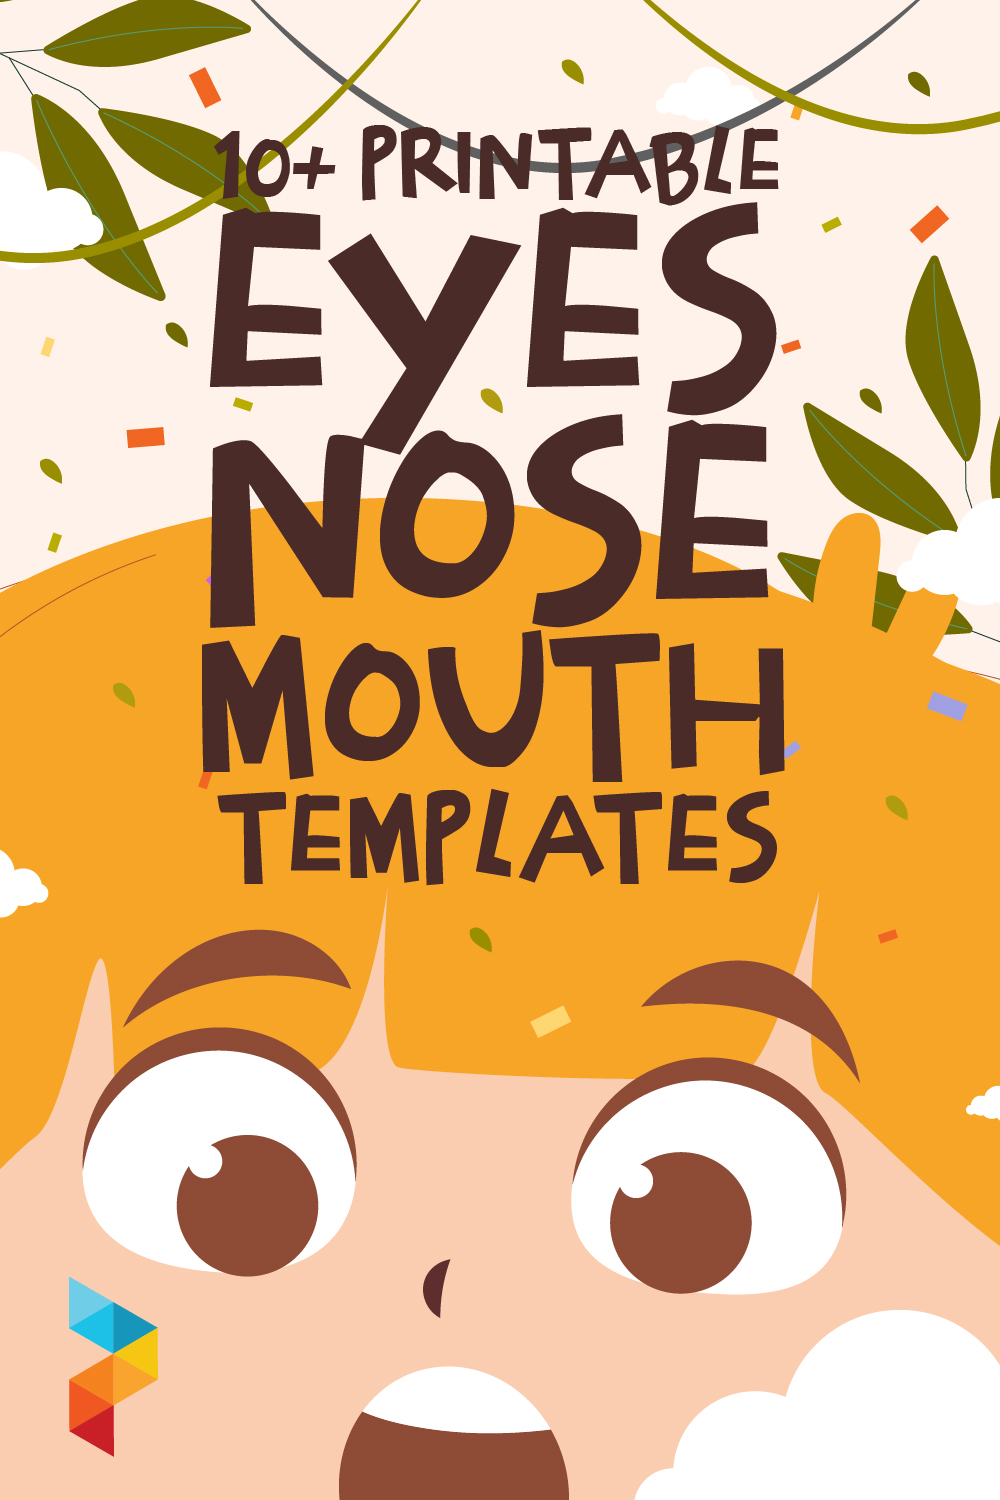 Eyes Nose Mouth Templates